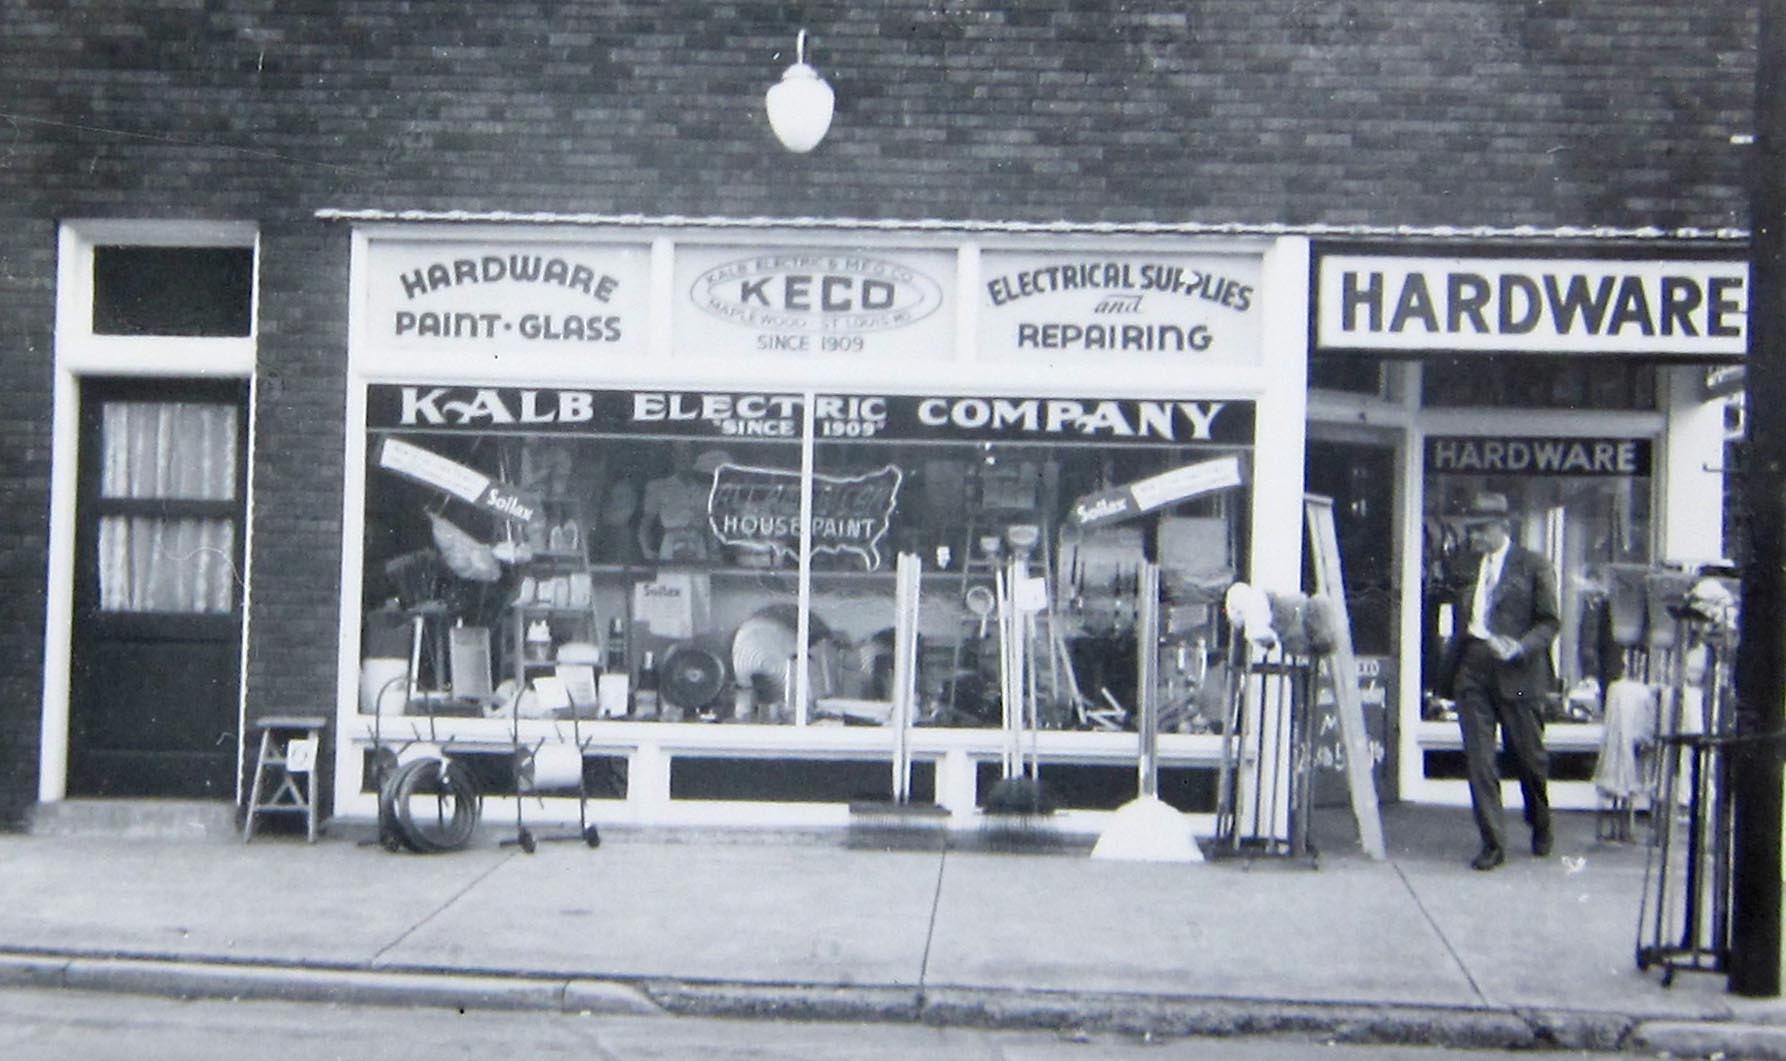 Maplewood History: Even More Vintage Photos from the Kalb/Fischer Collection